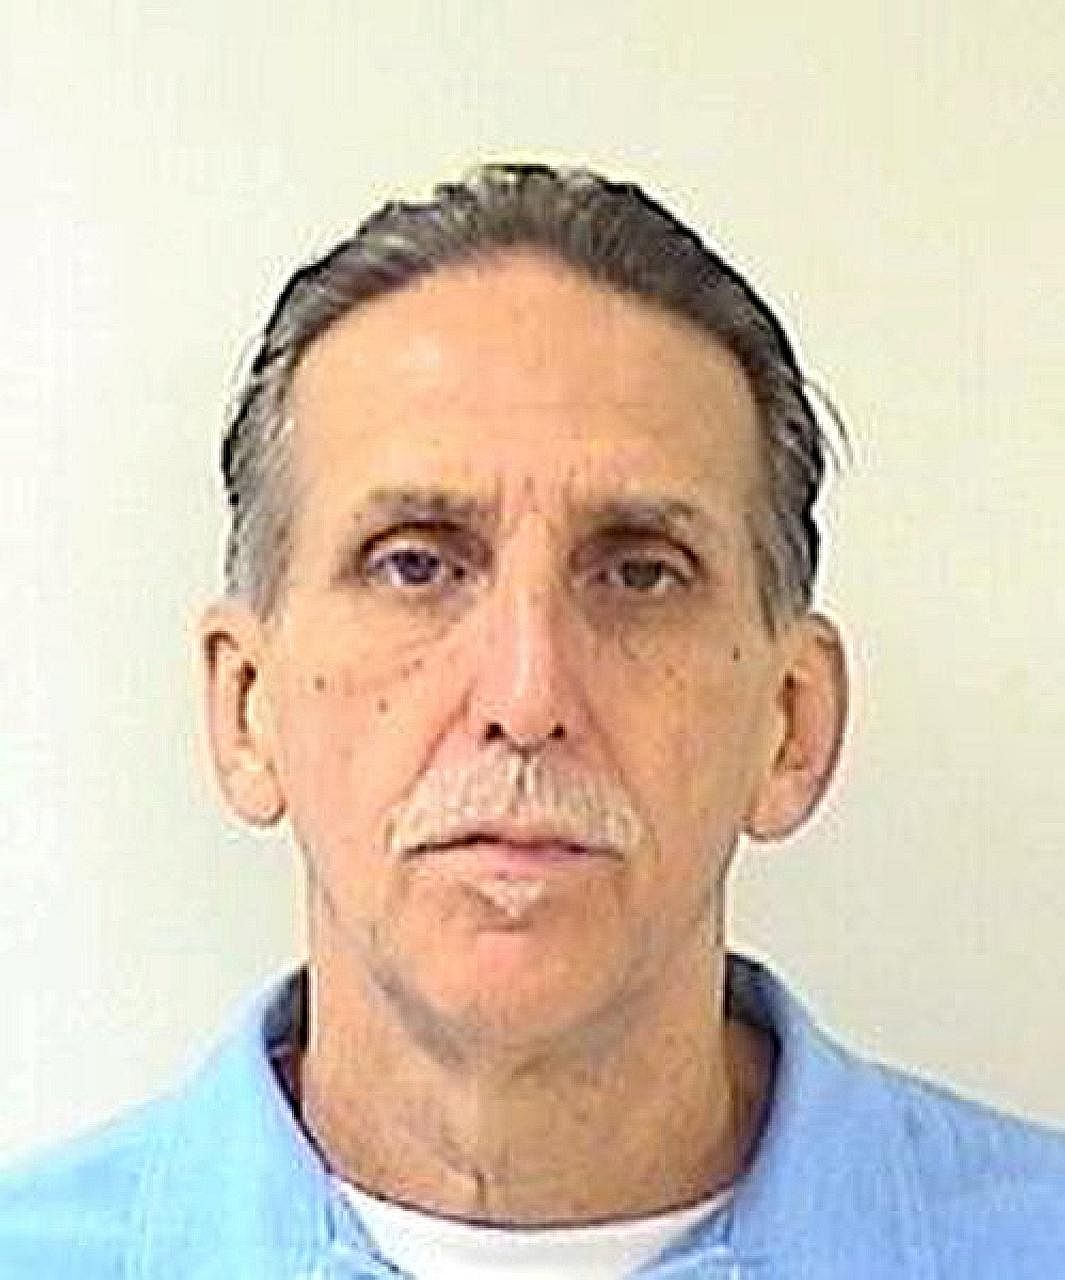 Mr Craig Coley, 71, was released from prison in 2017 after being wrongly convicted for the murders of a woman and her four-year-old son in 1978.